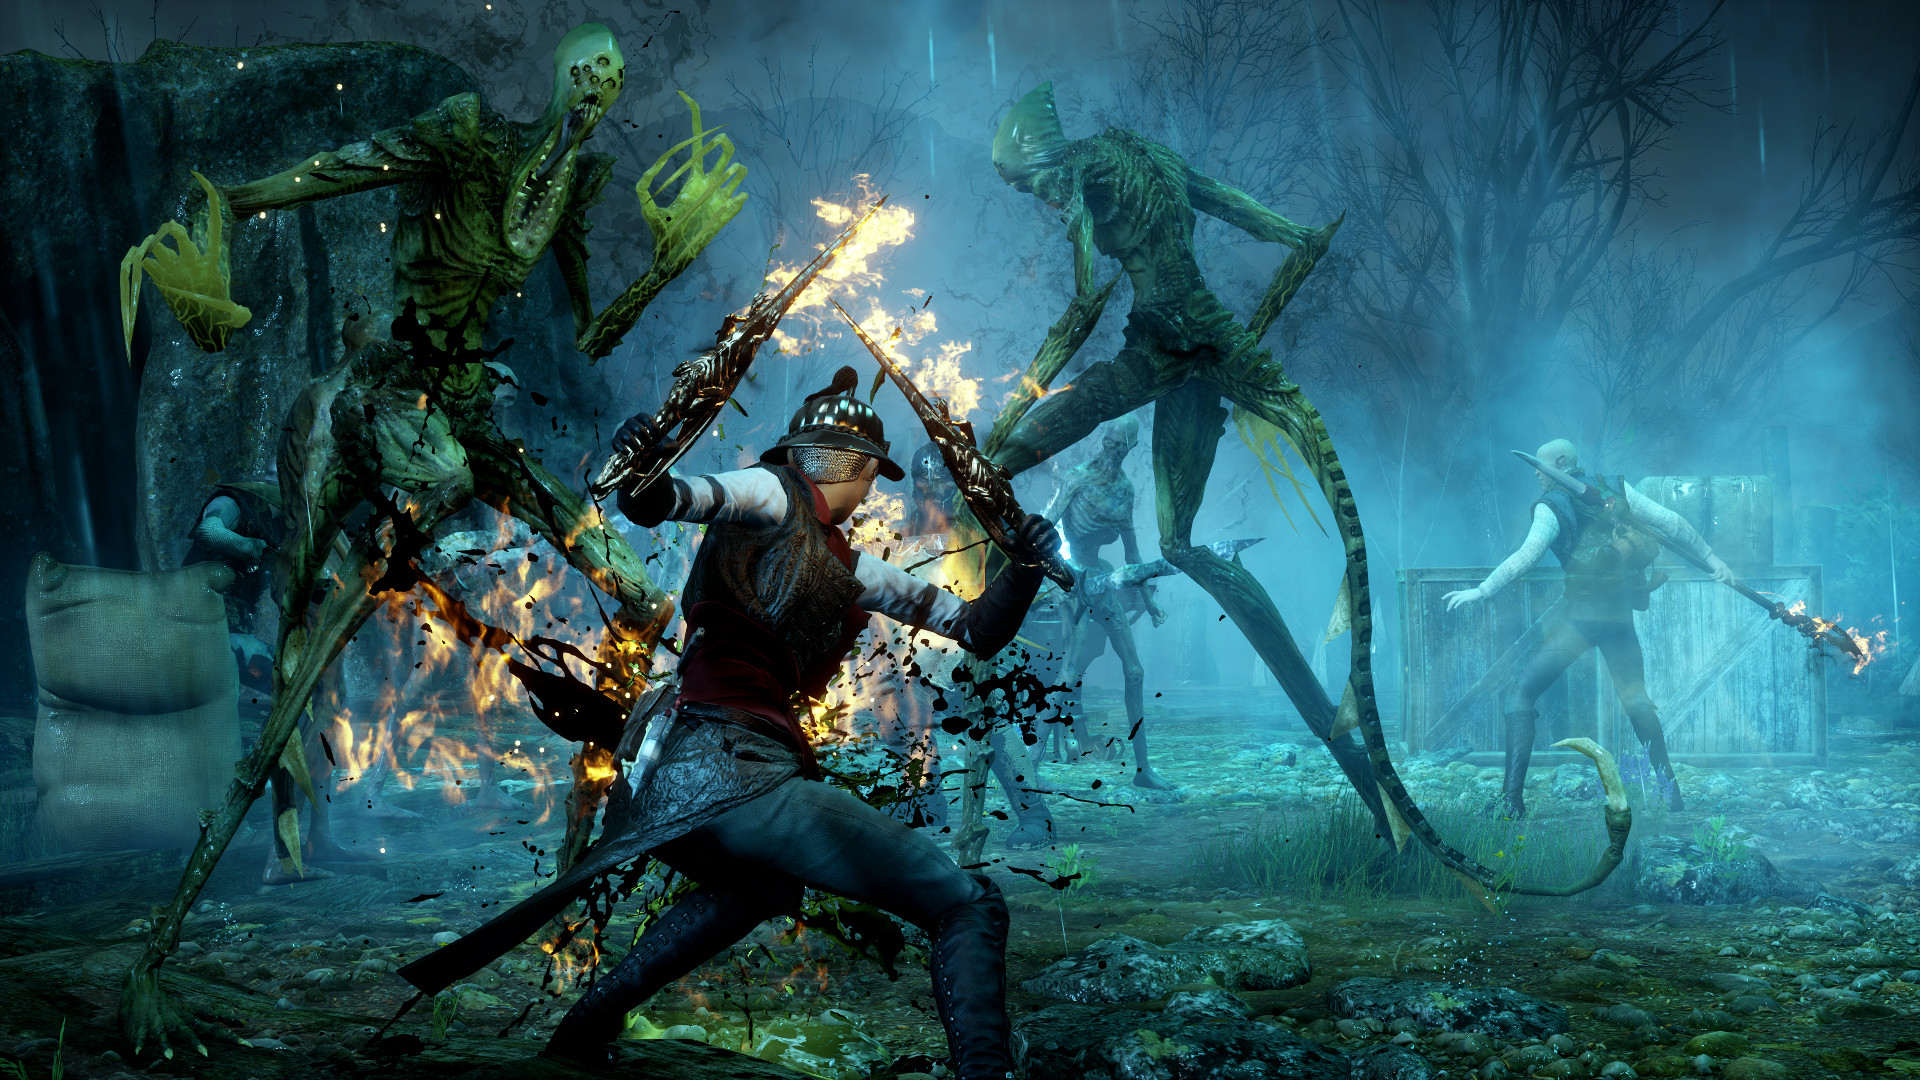 An image of from the game Dragon age inquisition. The main chracter fighting demons